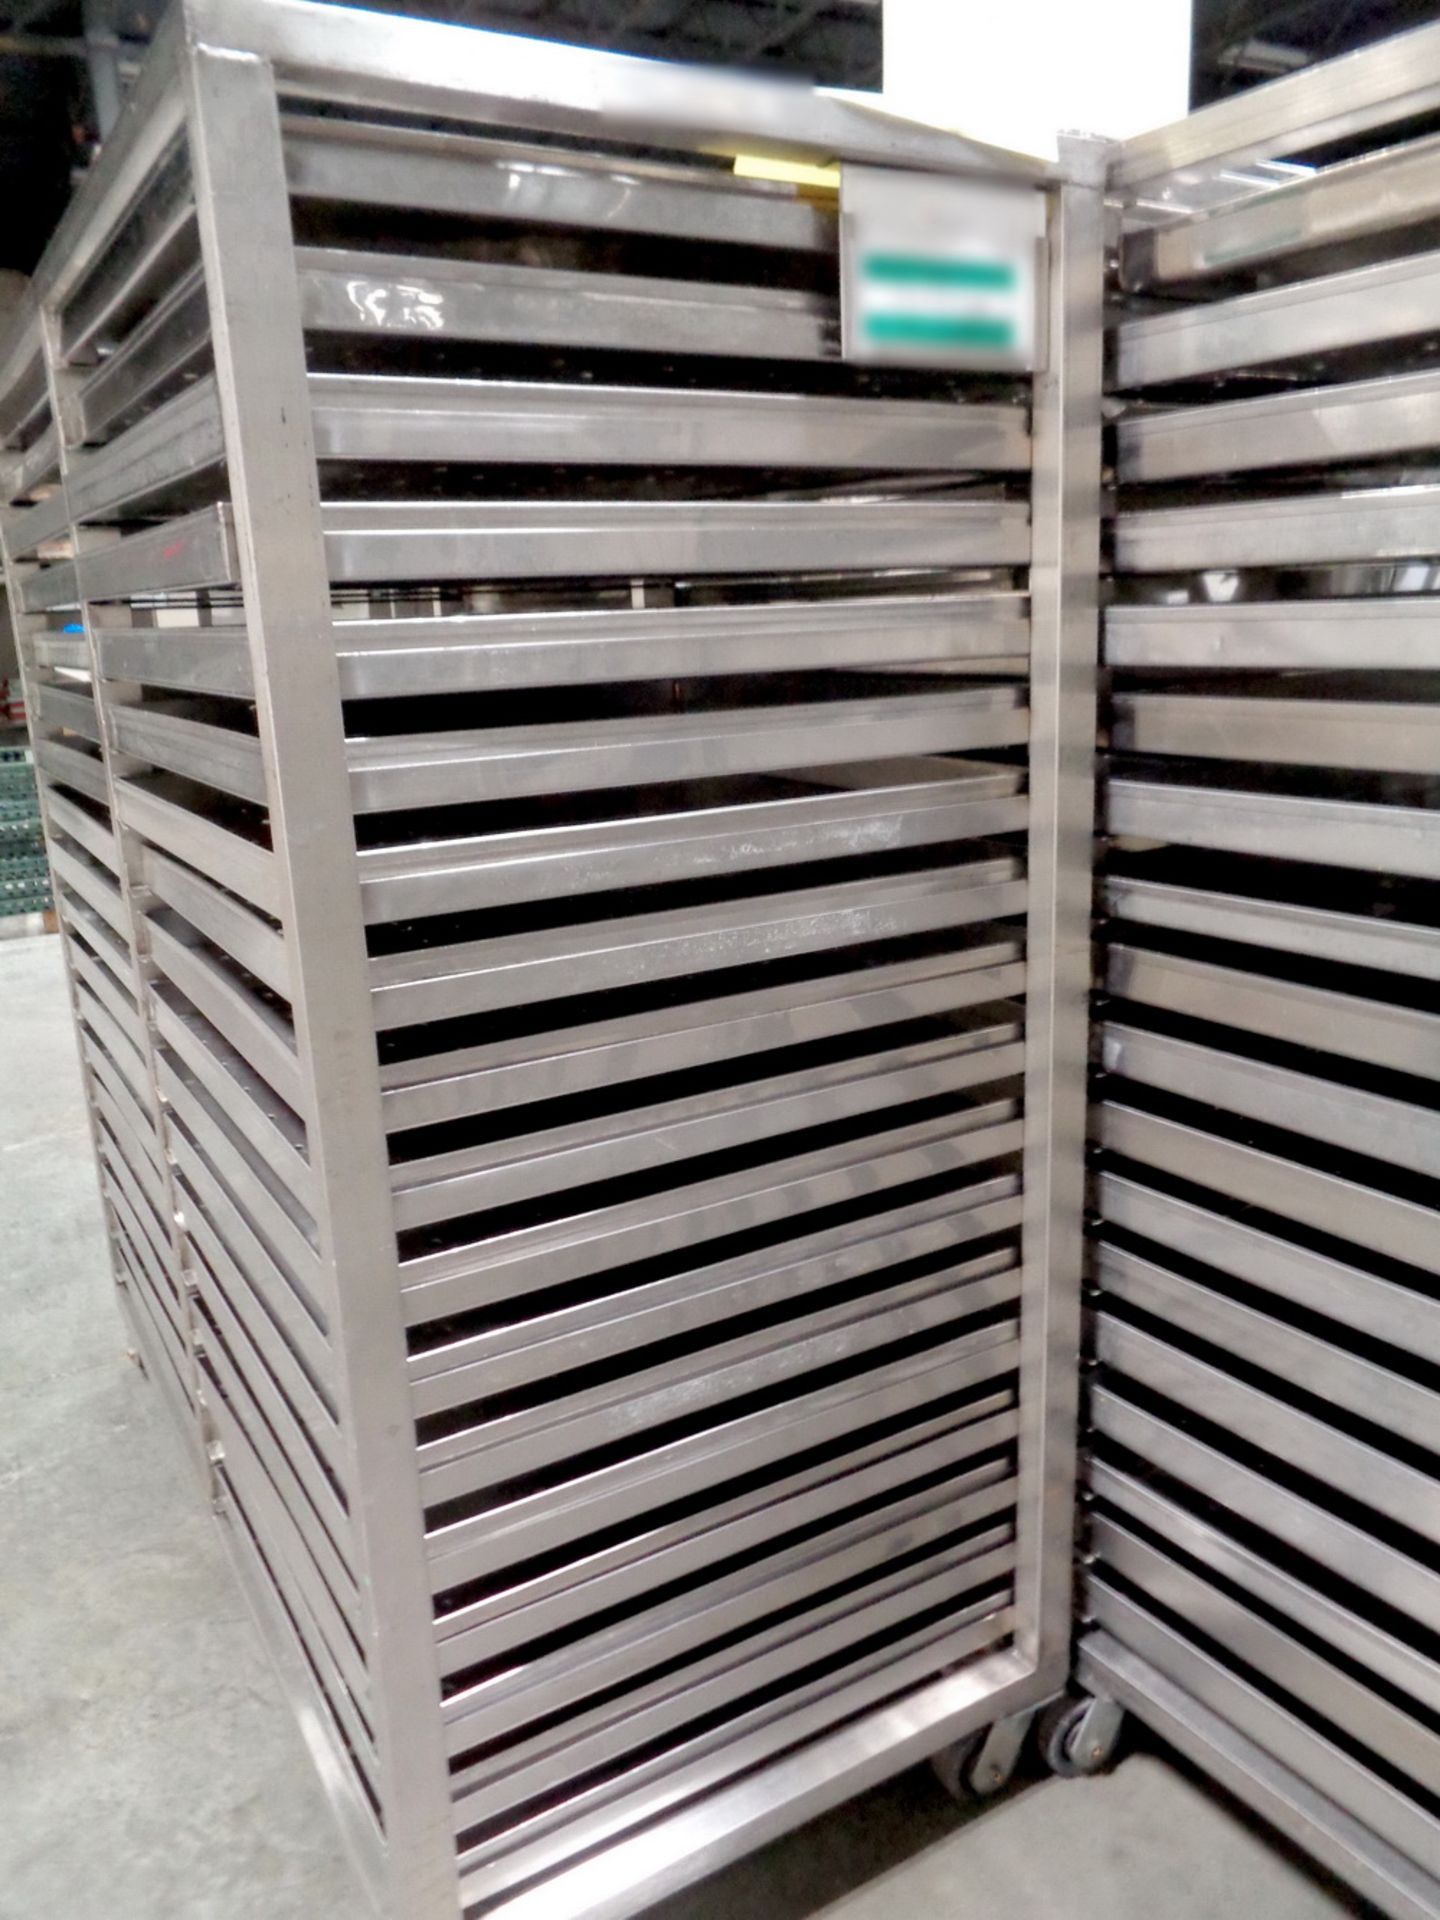 SS Oven Cart/Truck with 36 trays, each tray 30" x 30" x 2" - Image 3 of 3